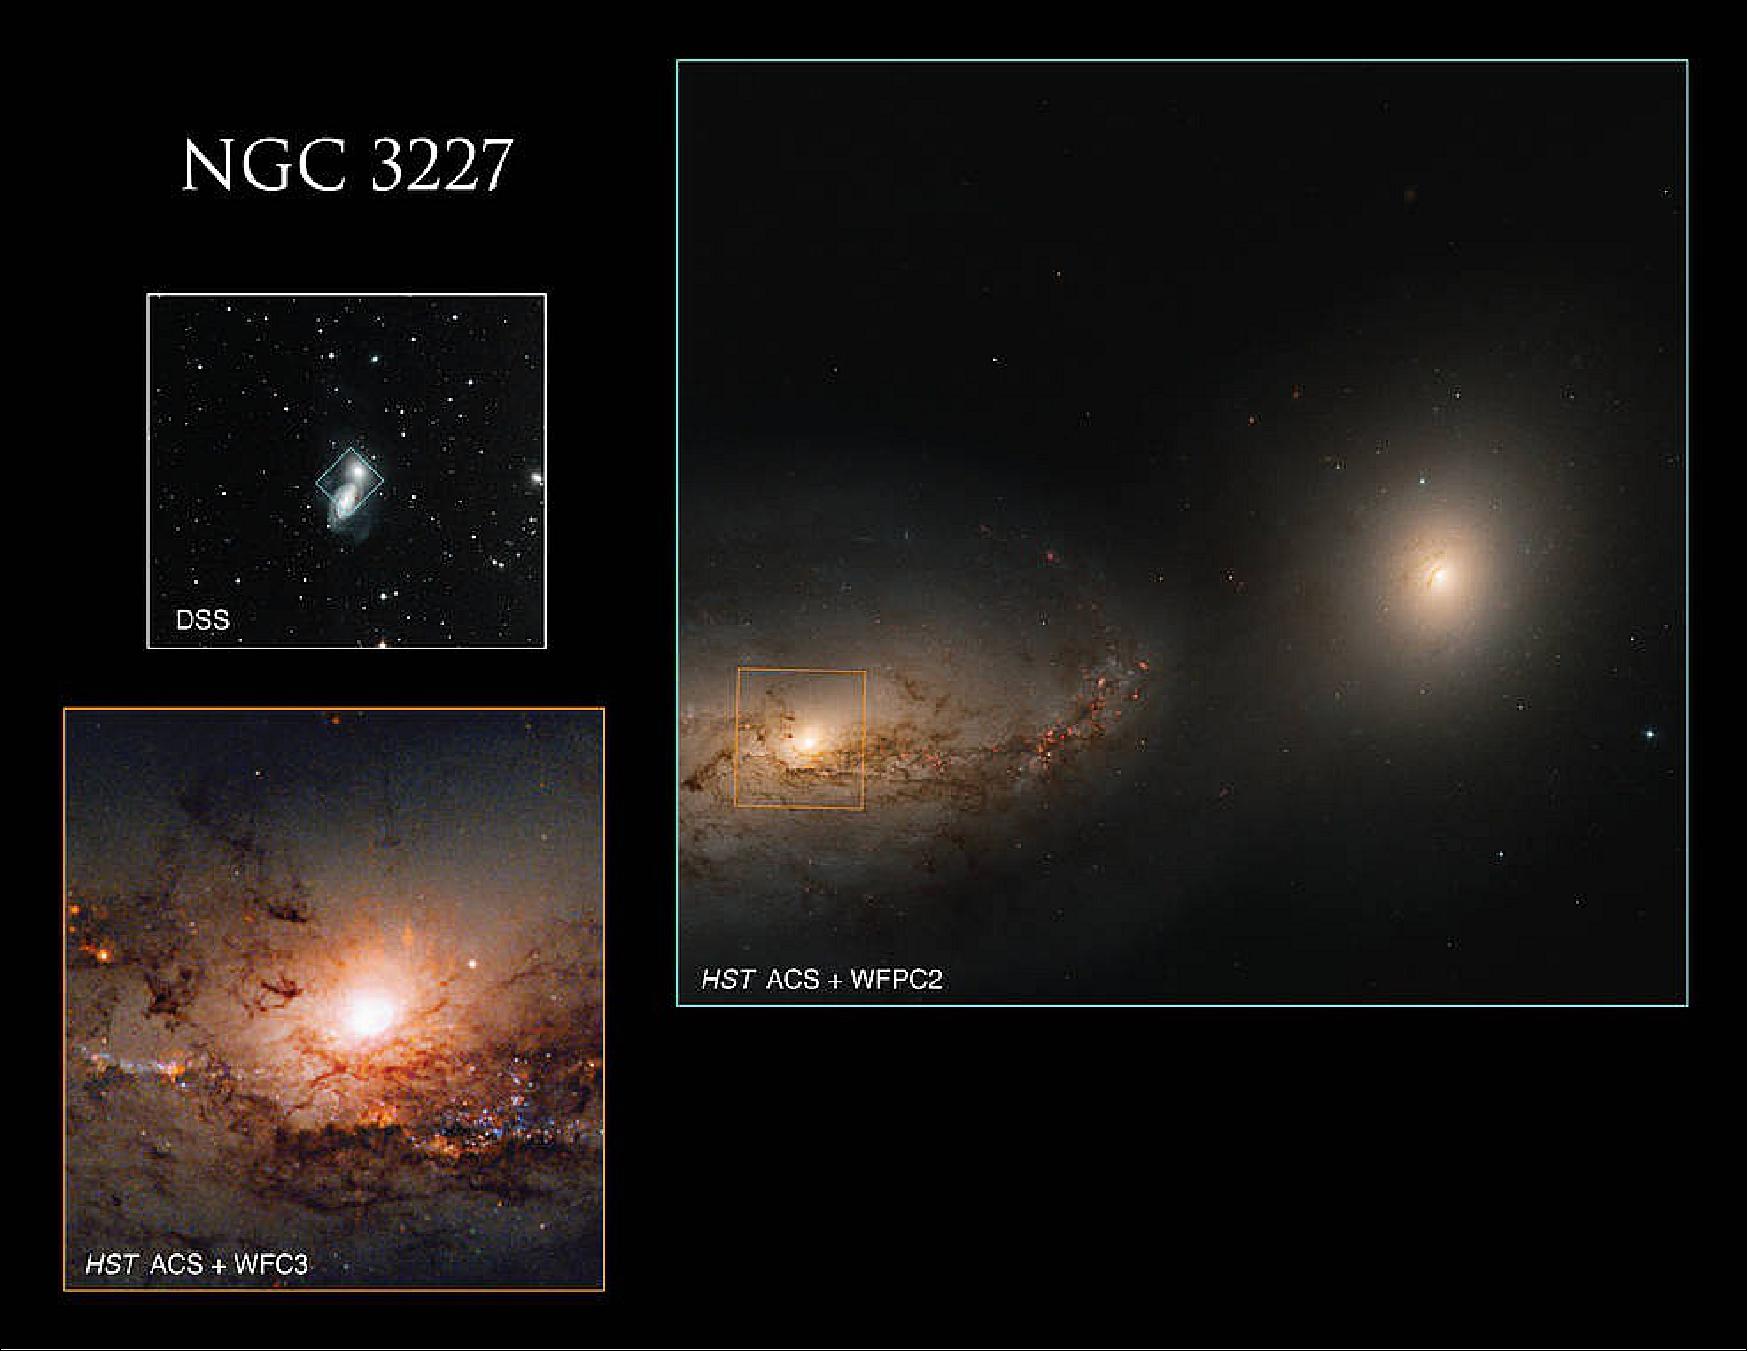 Figure 32: The upper left, black and white image taken by the Digital Sky Survey outlines the portion of NGC 3227 and 3226 that Hubble imaged. The lower left Hubble image highlights the active core of NGC 3227 and showcases its dark dust lanes and bright star-forming regions [image credits: NASA, ESA, H. Ford (Johns Hopkins University), and DSS; Image Processing: G. Kober (NASA Goddard/Catholic University of America)]